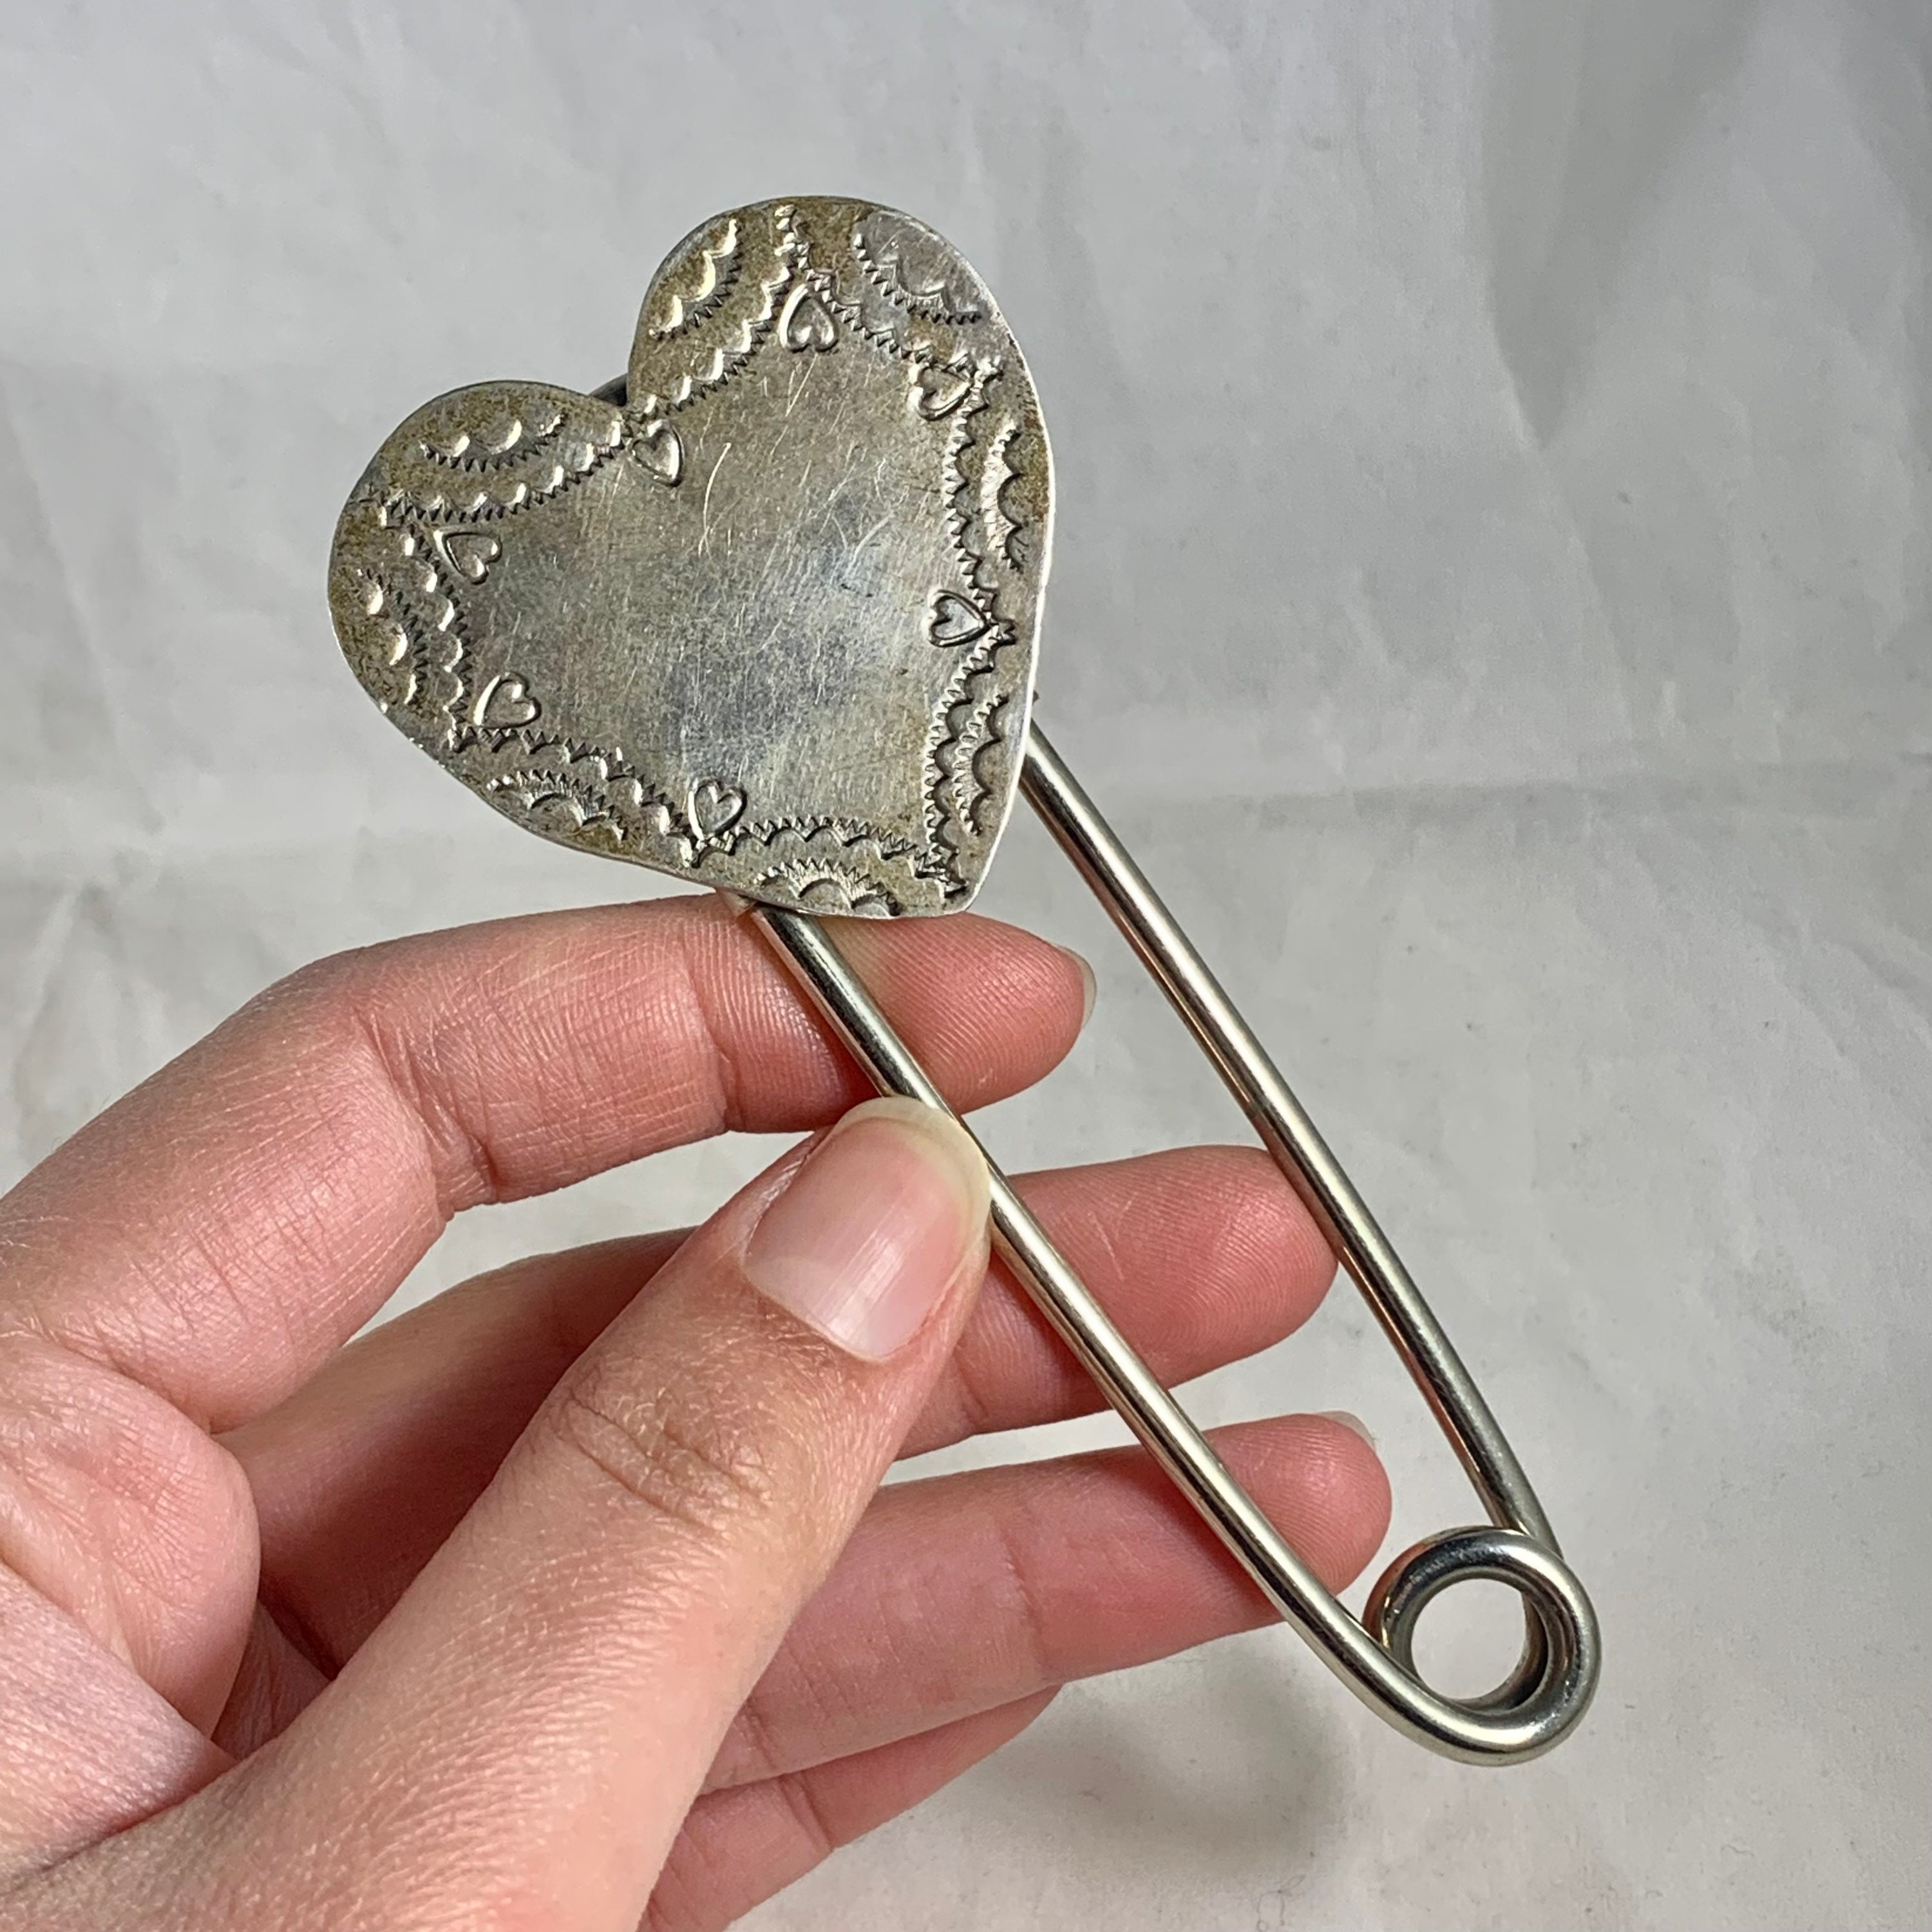 Safety Pin/diaper Pin Decorative Brads 12 Pack, 18mm FREE SHIPPING 